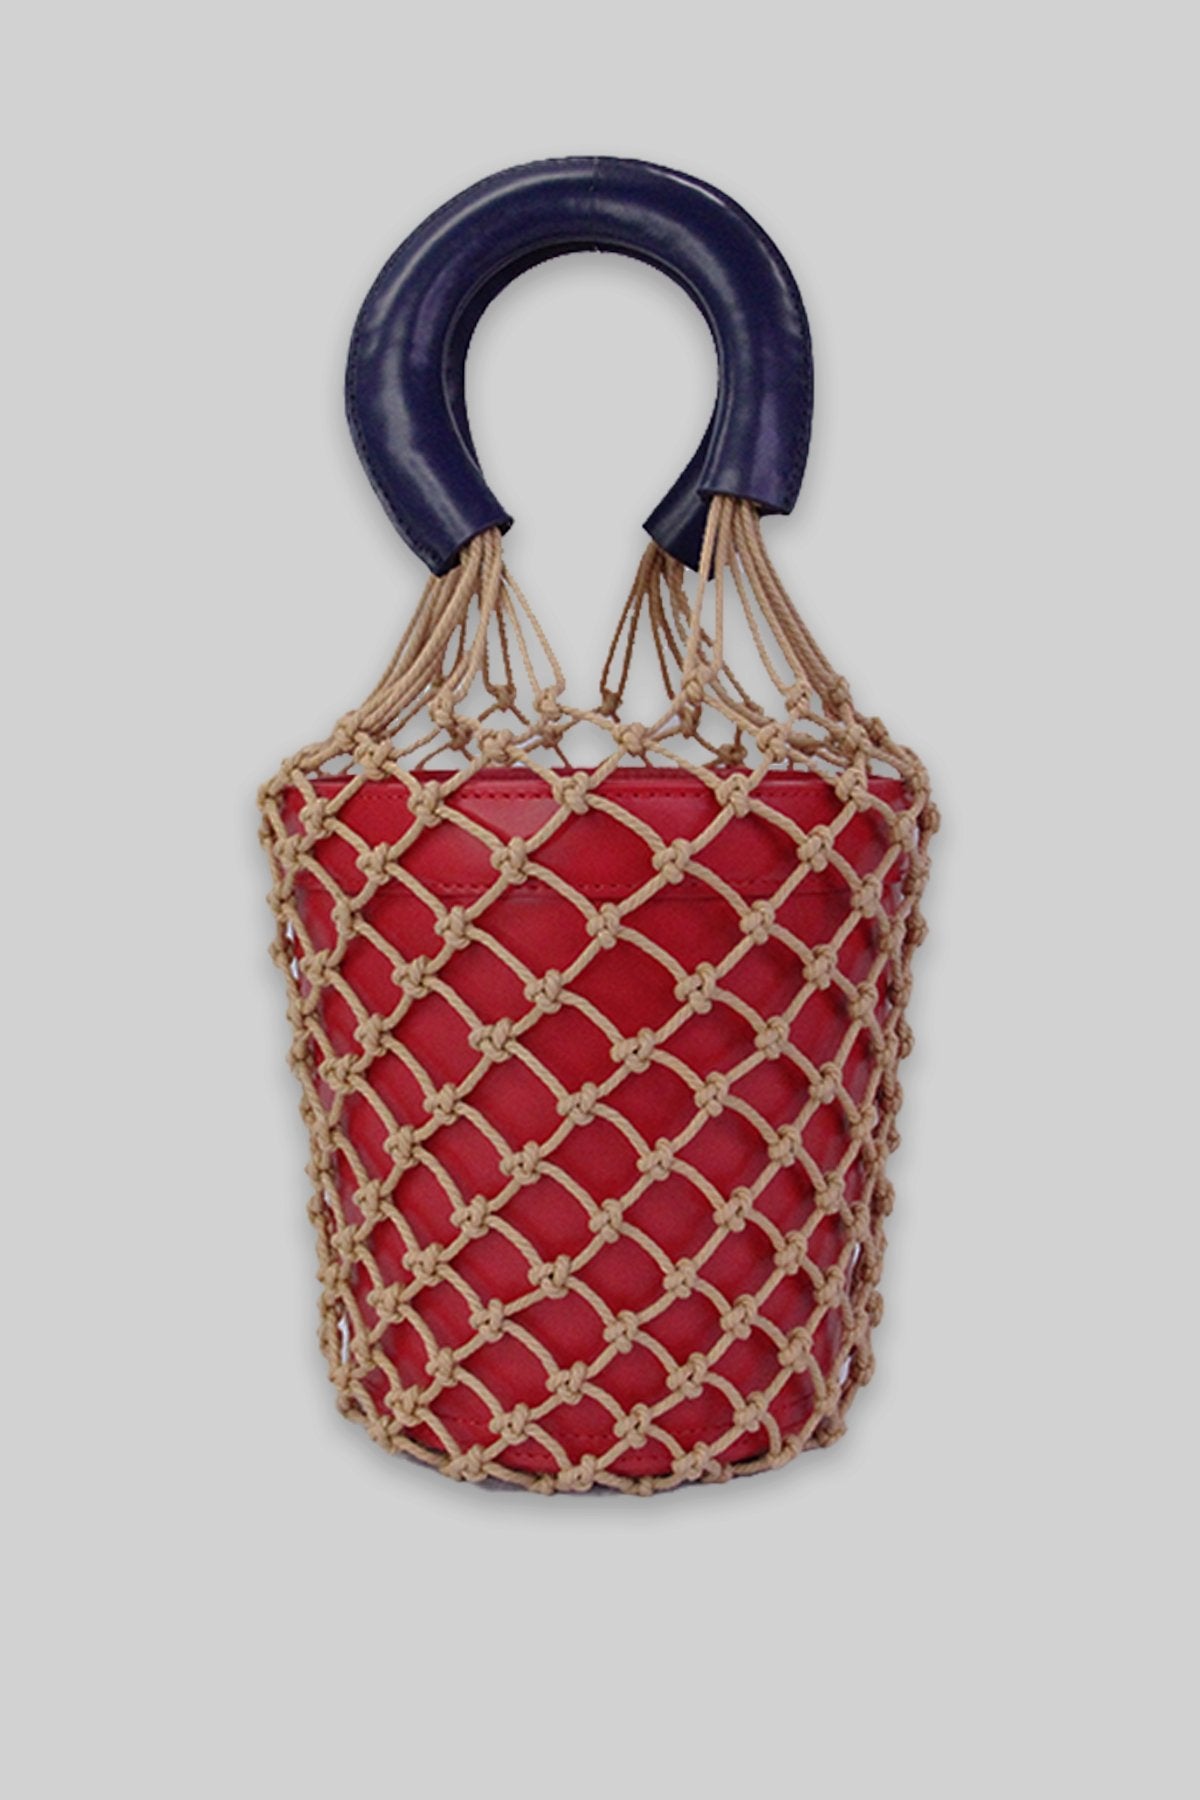 Staud Red and Navy Leather Handbag with Netting - shop-olivia.com